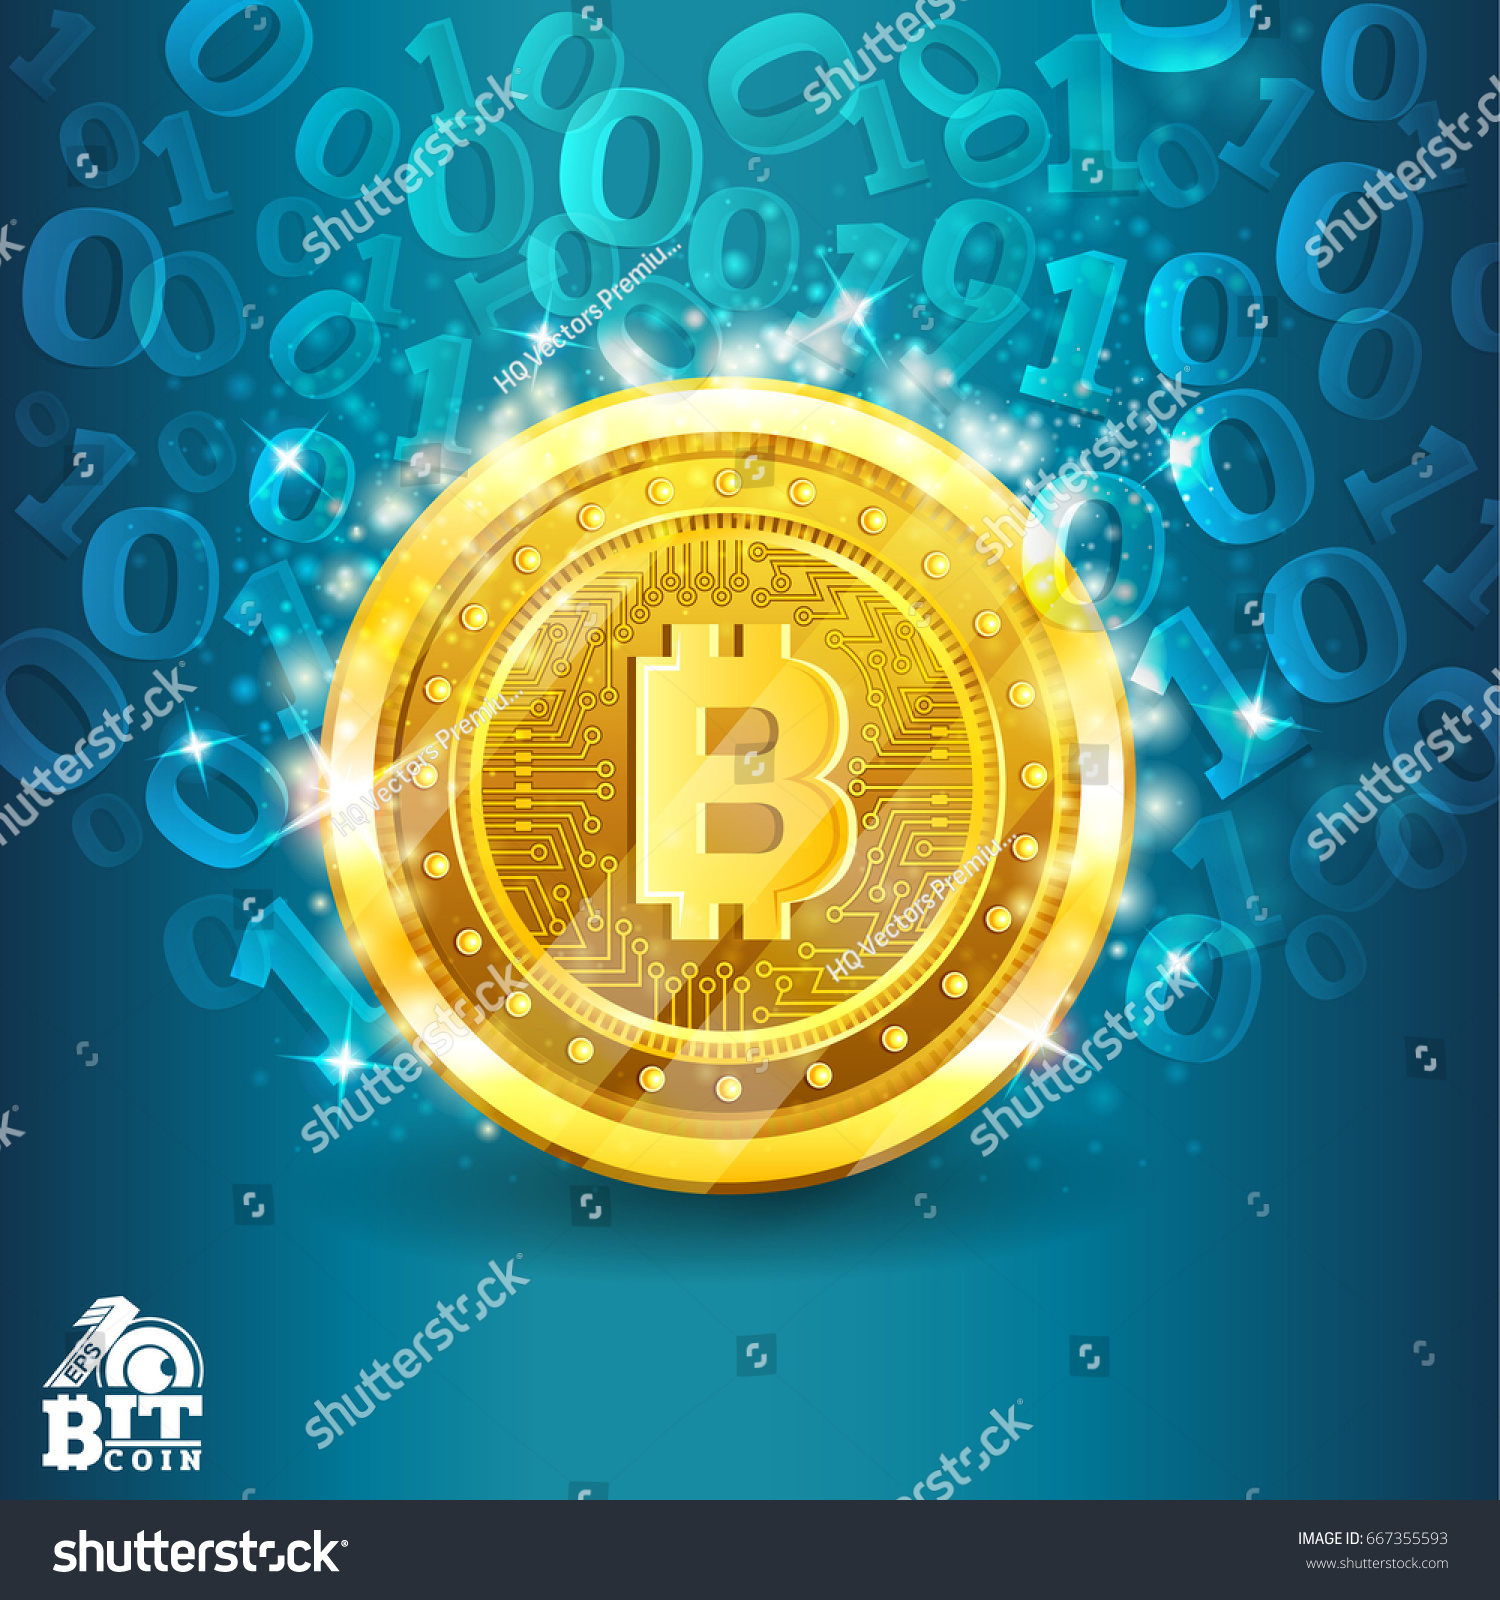 SVG of Golden bit coin in the center of blue background with binary code. Abstract vector glossy business background svg